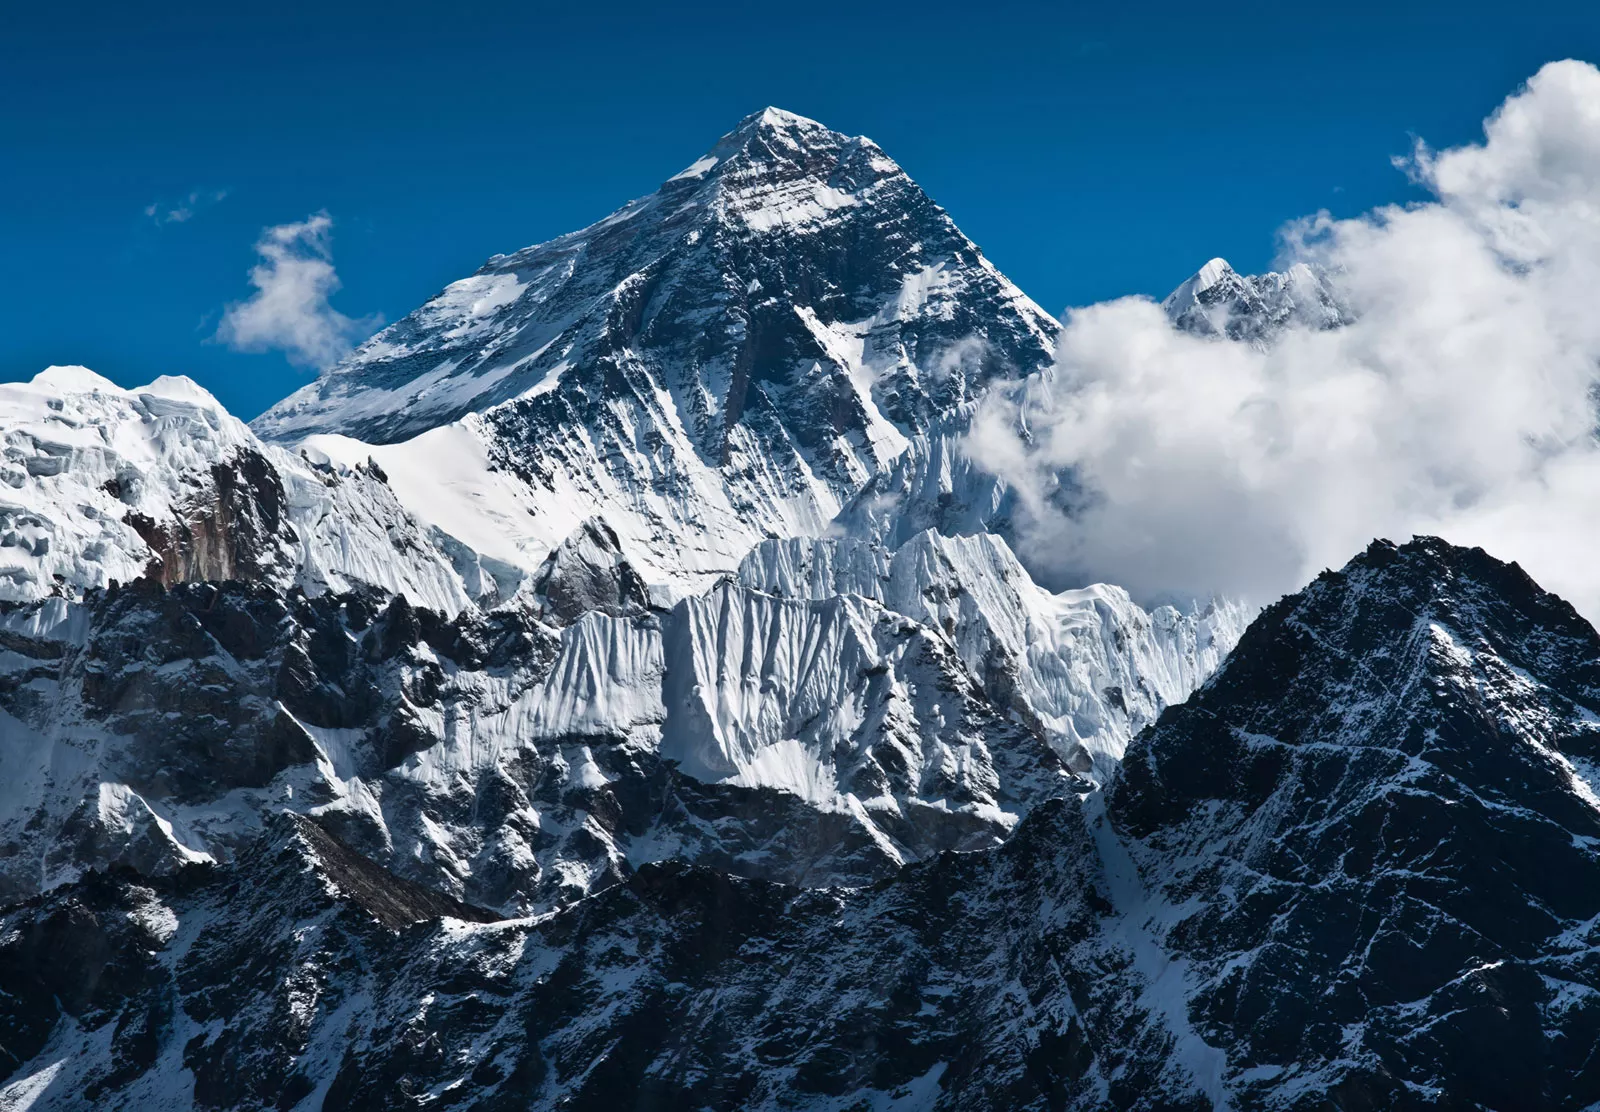 Mount Everest-China in China, East Asia | Mountains - Rated 0.7